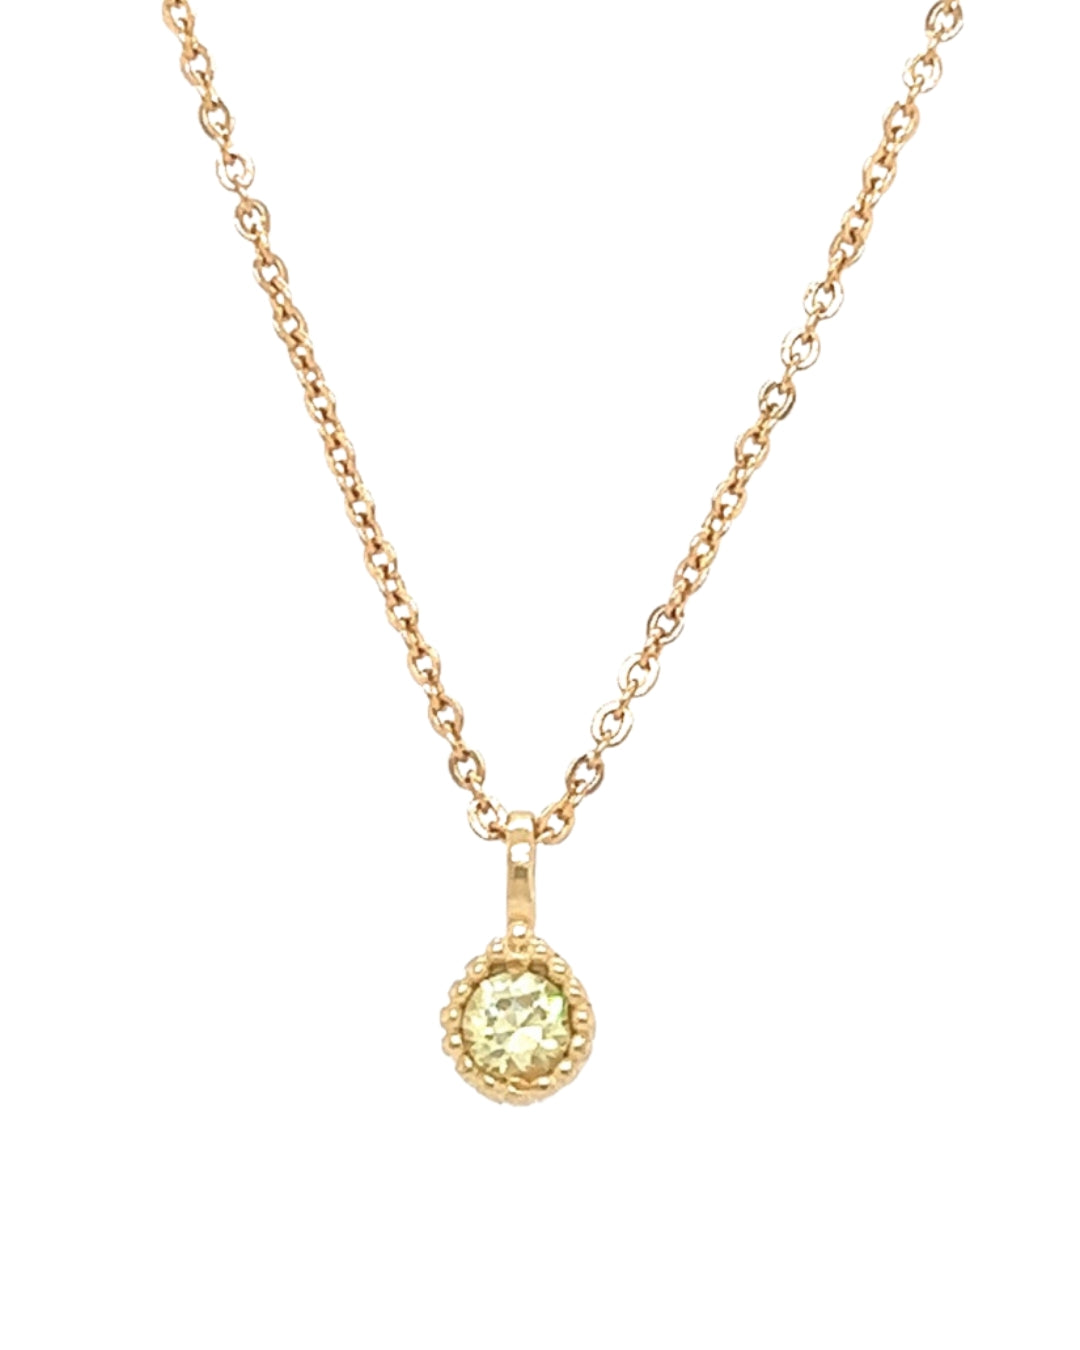 Gold August Peridot Birthstone Necklace 